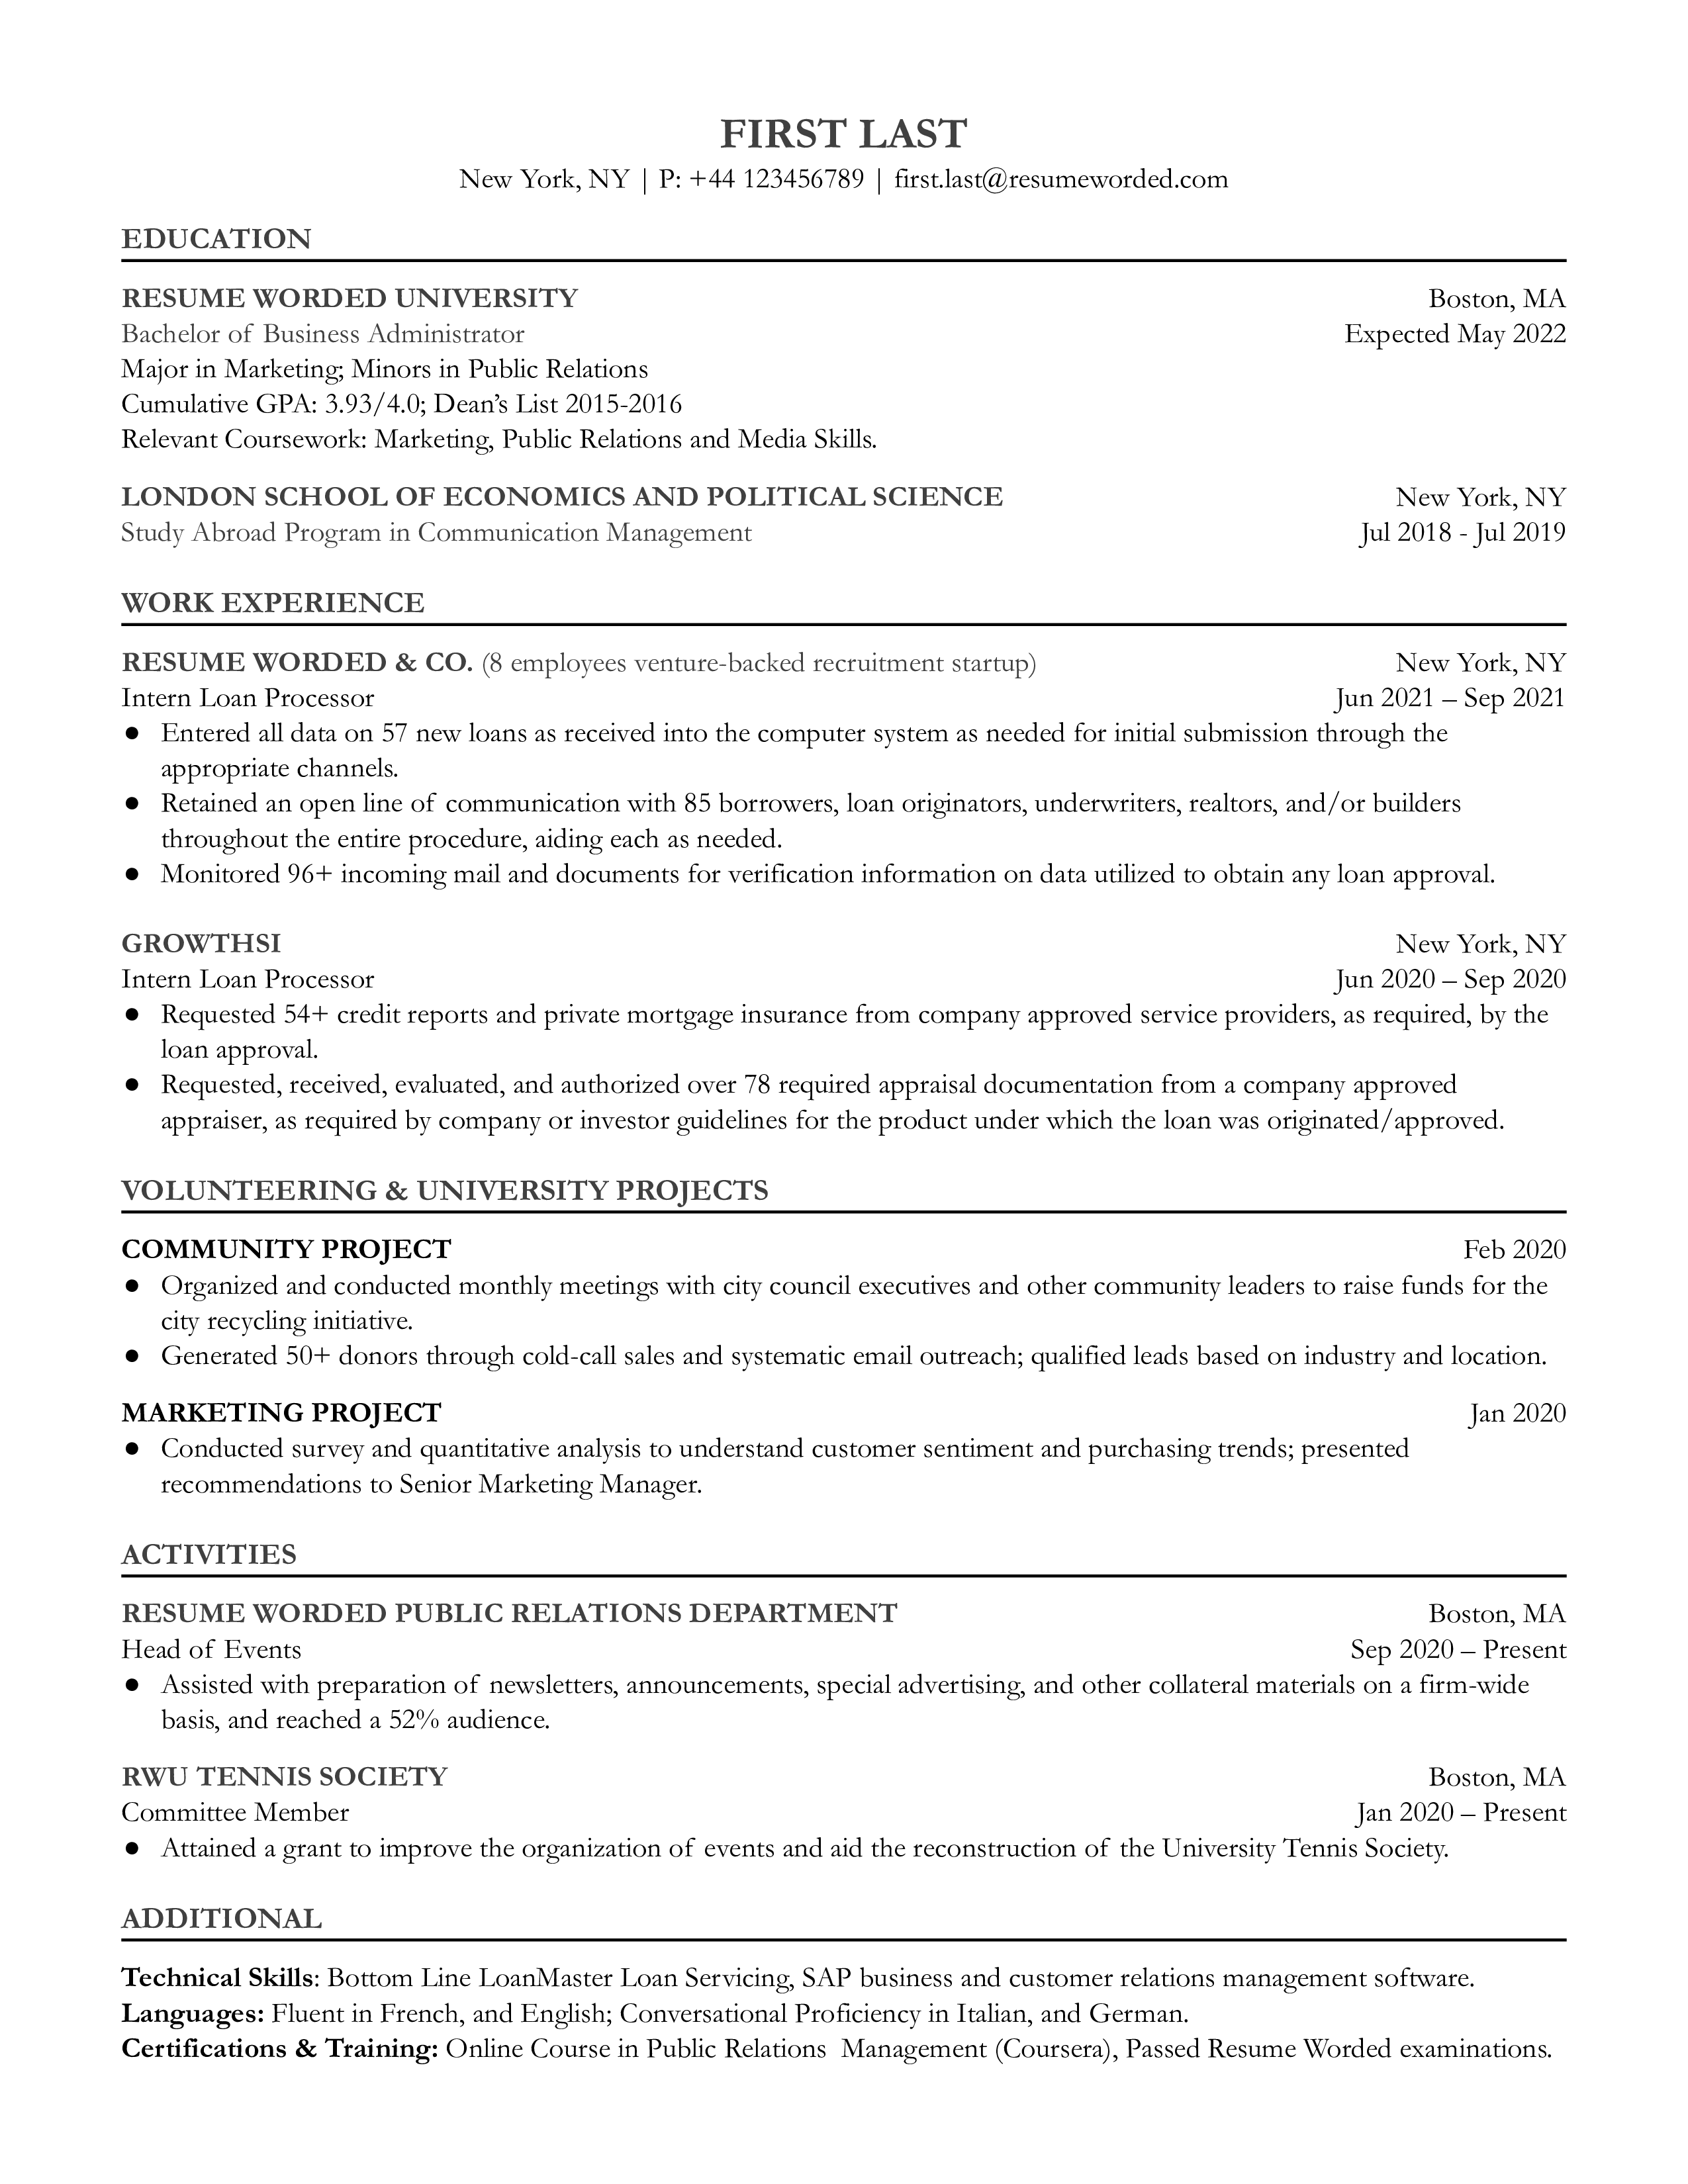 A concise CV focusing on software skills and precision for an entry-level loan processor role.